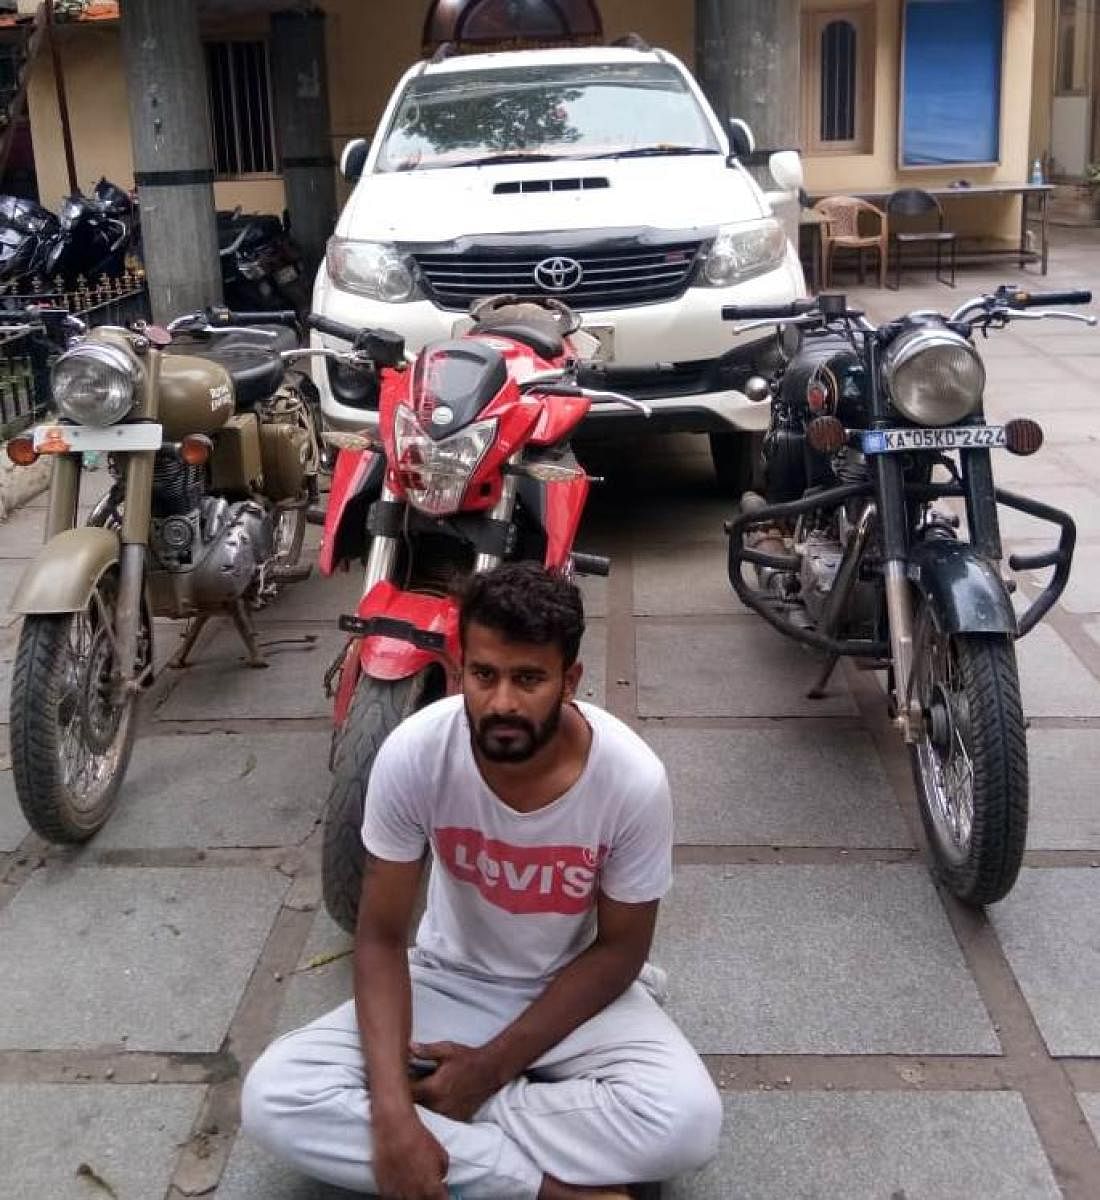 Bharath B M alias Preetham, a resident of Channasandra, stole a Toyota Fortuner, two Royal Enfield motorcycles and a Benelli motorbike.